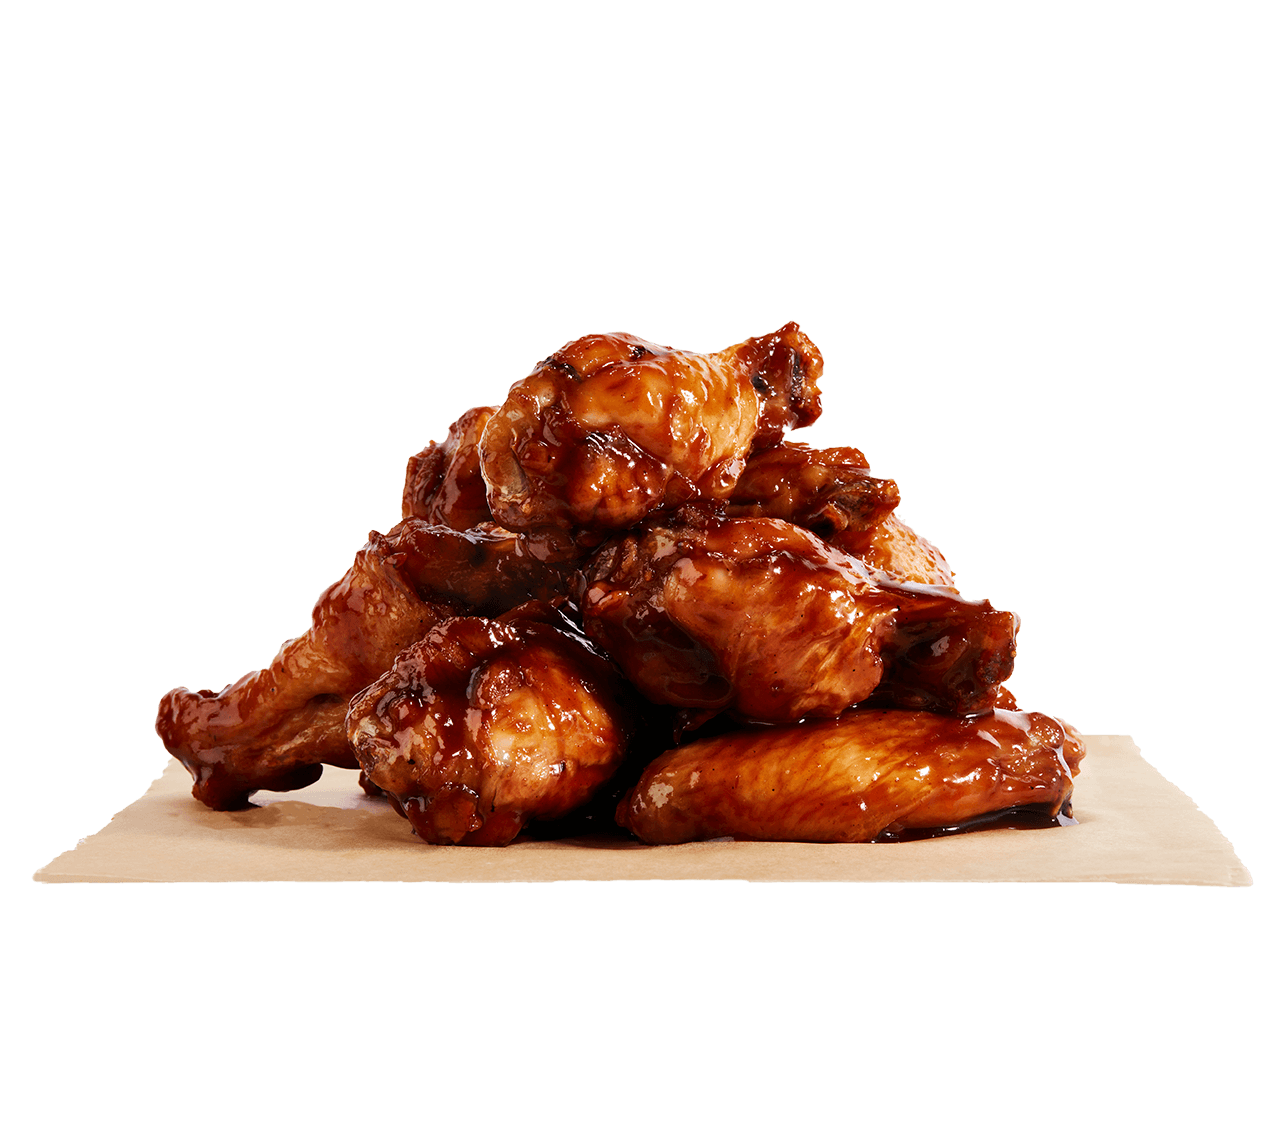 Drumstick Chicken Barbecue HQ Image Free PNG Image